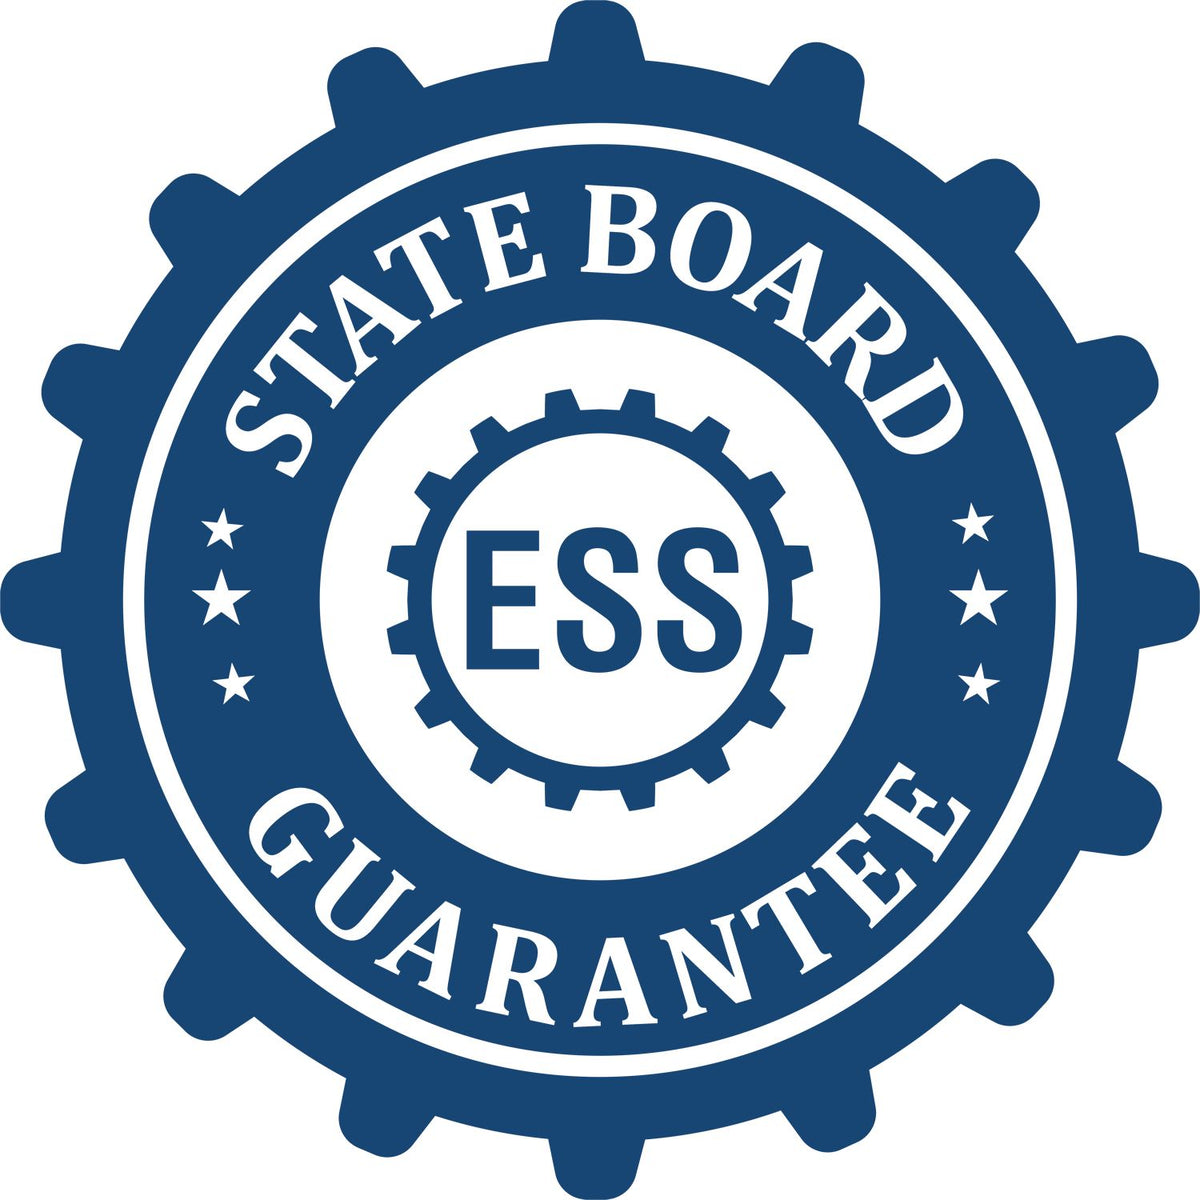 An emblem in a gear shape illustrating a state board guarantee for the Hybrid Minnesota Land Surveyor Seal